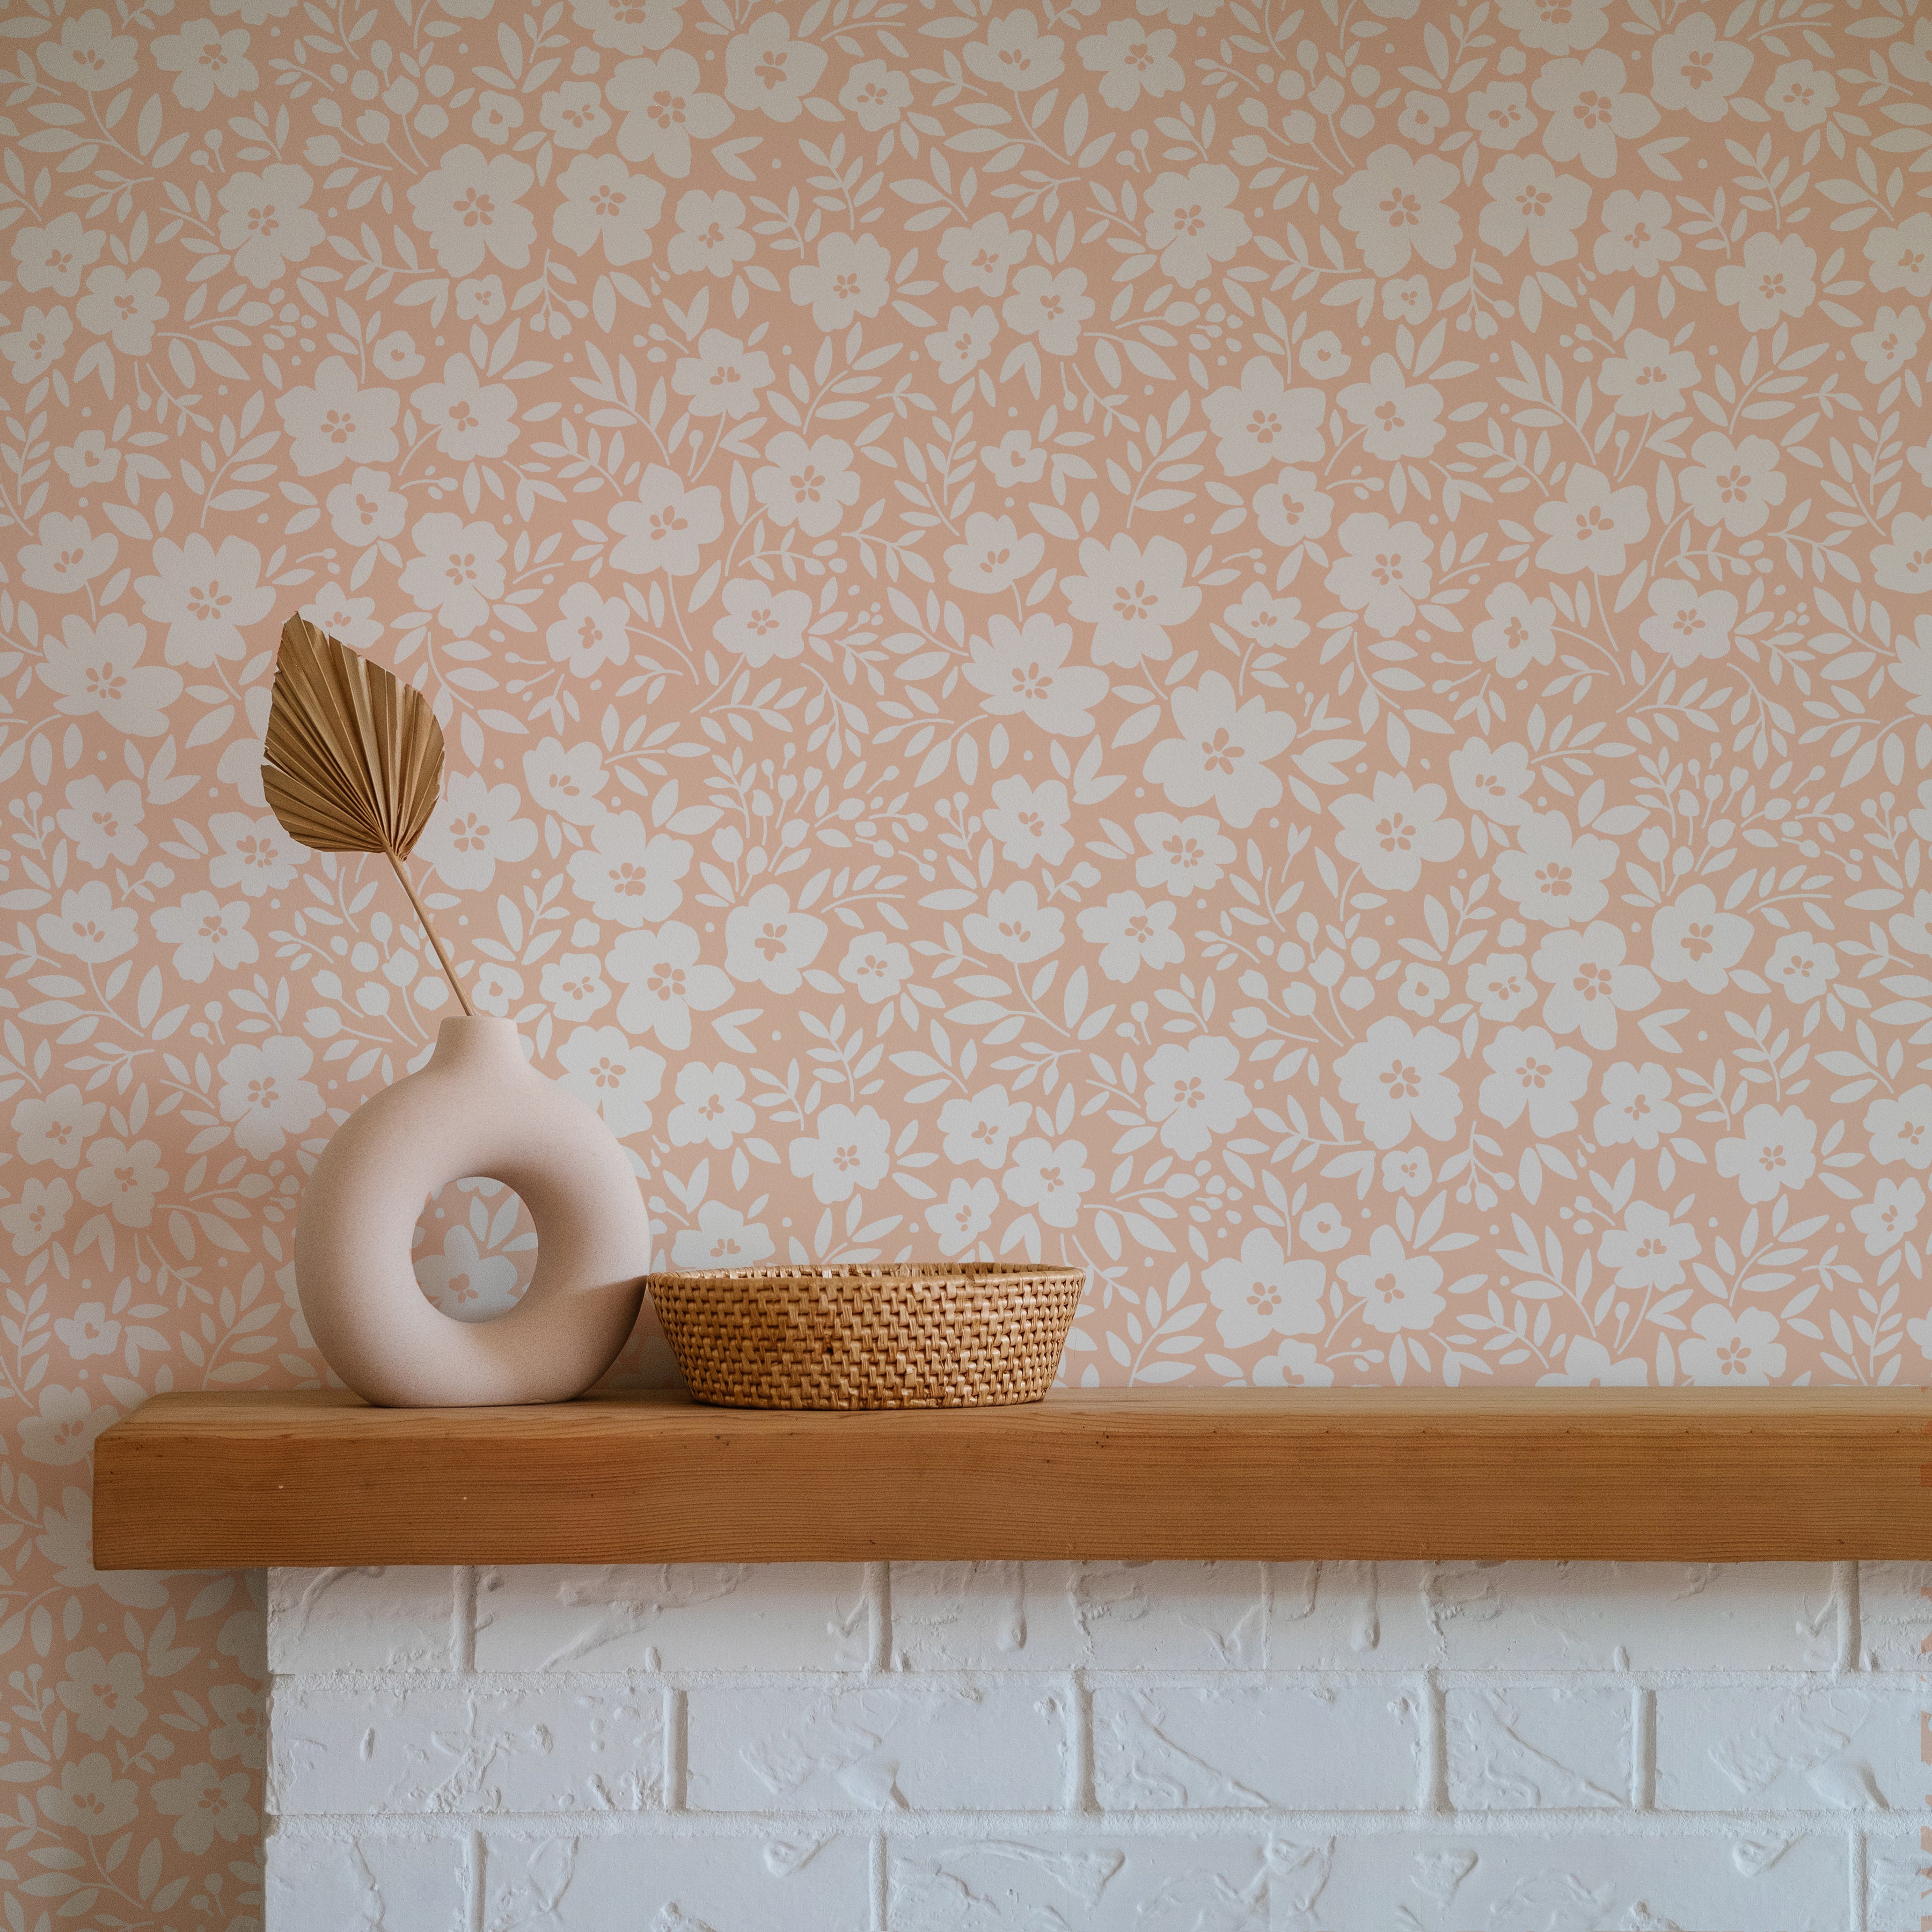 A modern and inviting space showcasing the Flower Power Wallpaper in Light Peach, featuring a dense floral pattern in light peach and white. The decor includes a contemporary vase and a woven basket on a wooden mantle, adding a rustic charm to the floral backdrop.